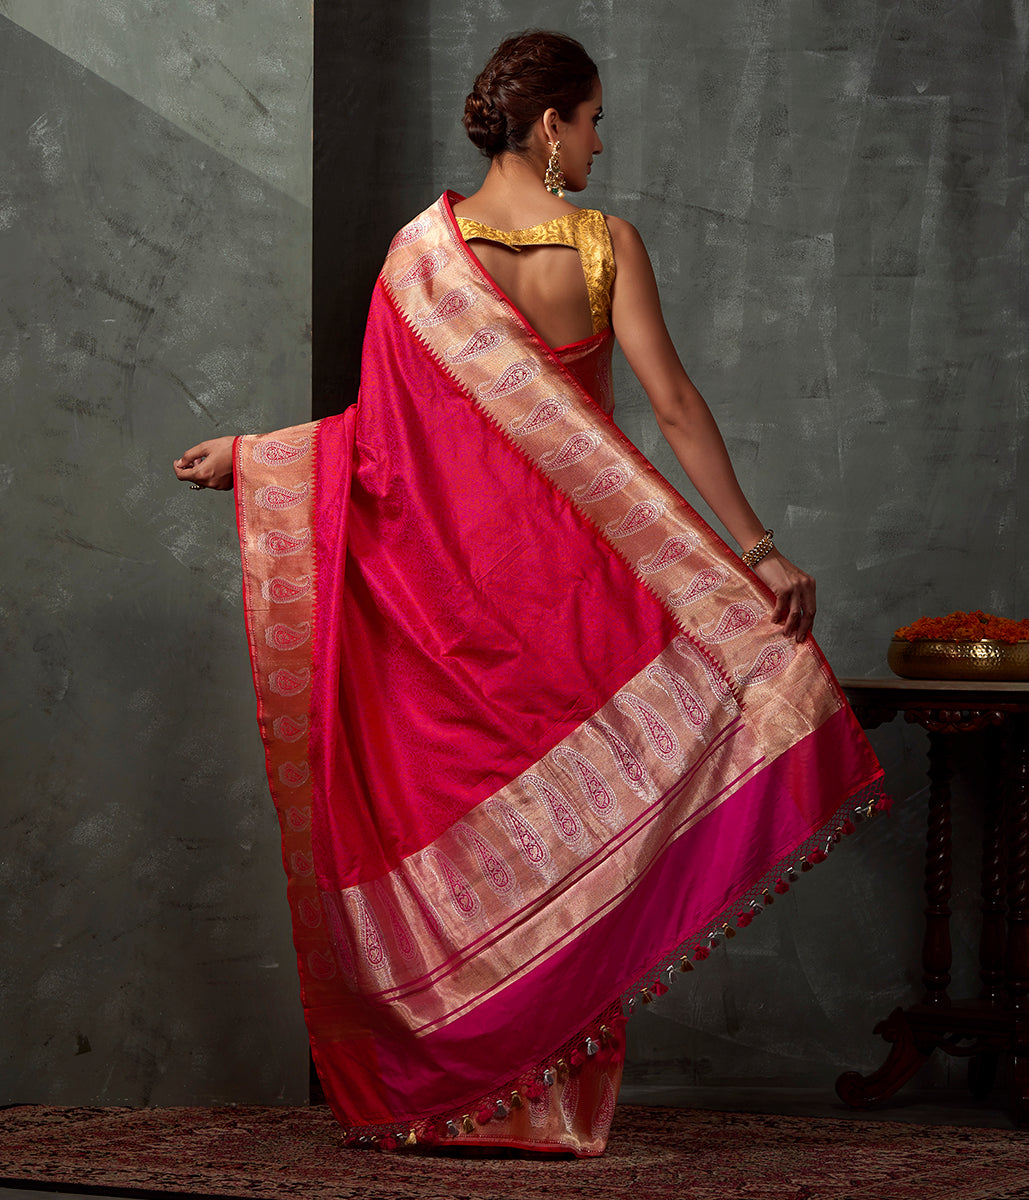 Hot_Pink_Self_Weave_Tanchoi_Saree_with_Gold_and_Silver_Zari_Paisleys_on_the_Border_WeaverStory_03